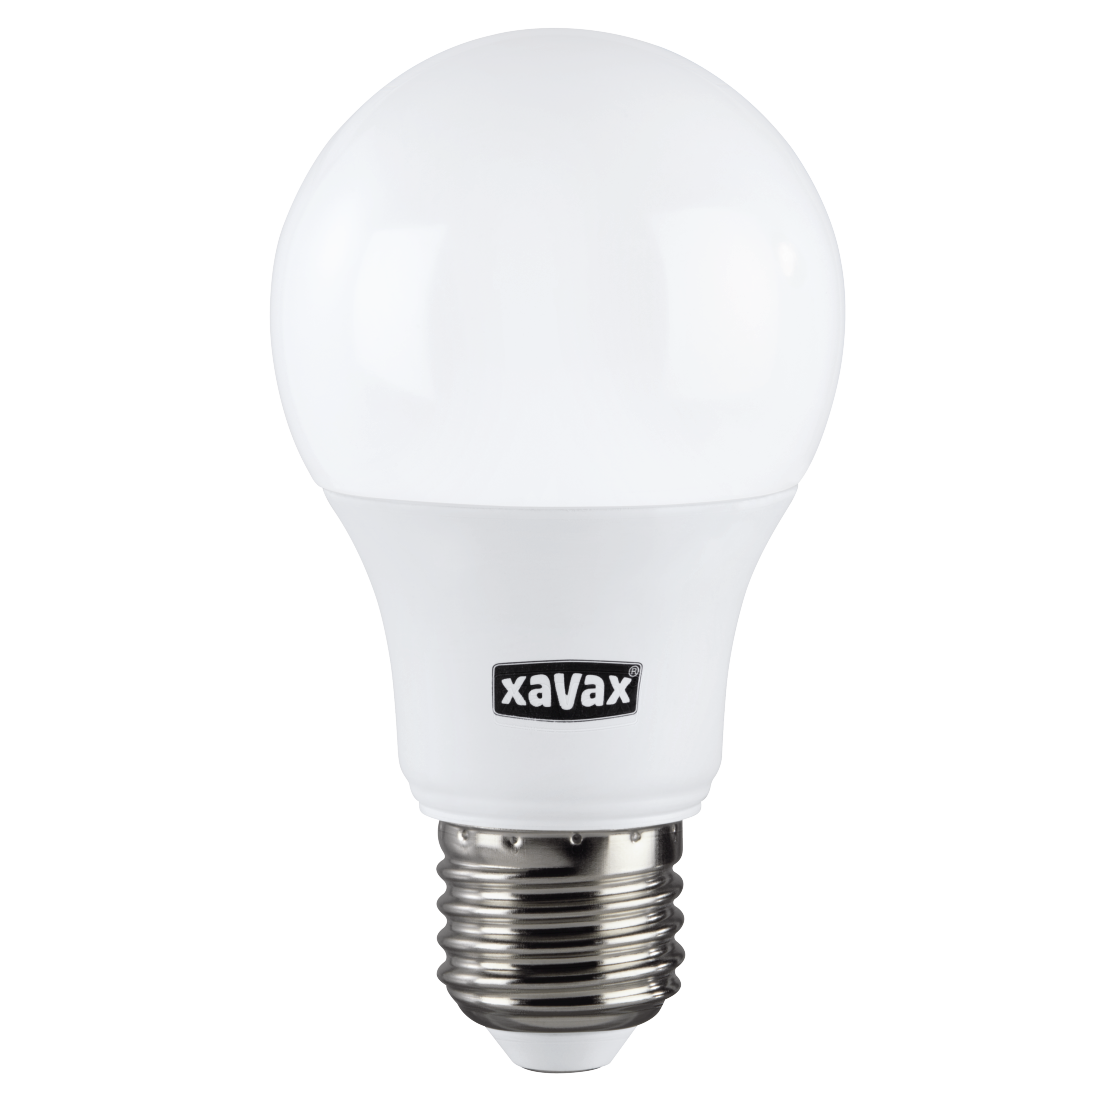 abx High-Res Image - Xavax, LED Bulb, E27, 470lm replaces 40W, incandescent bulb, warm white, RA90